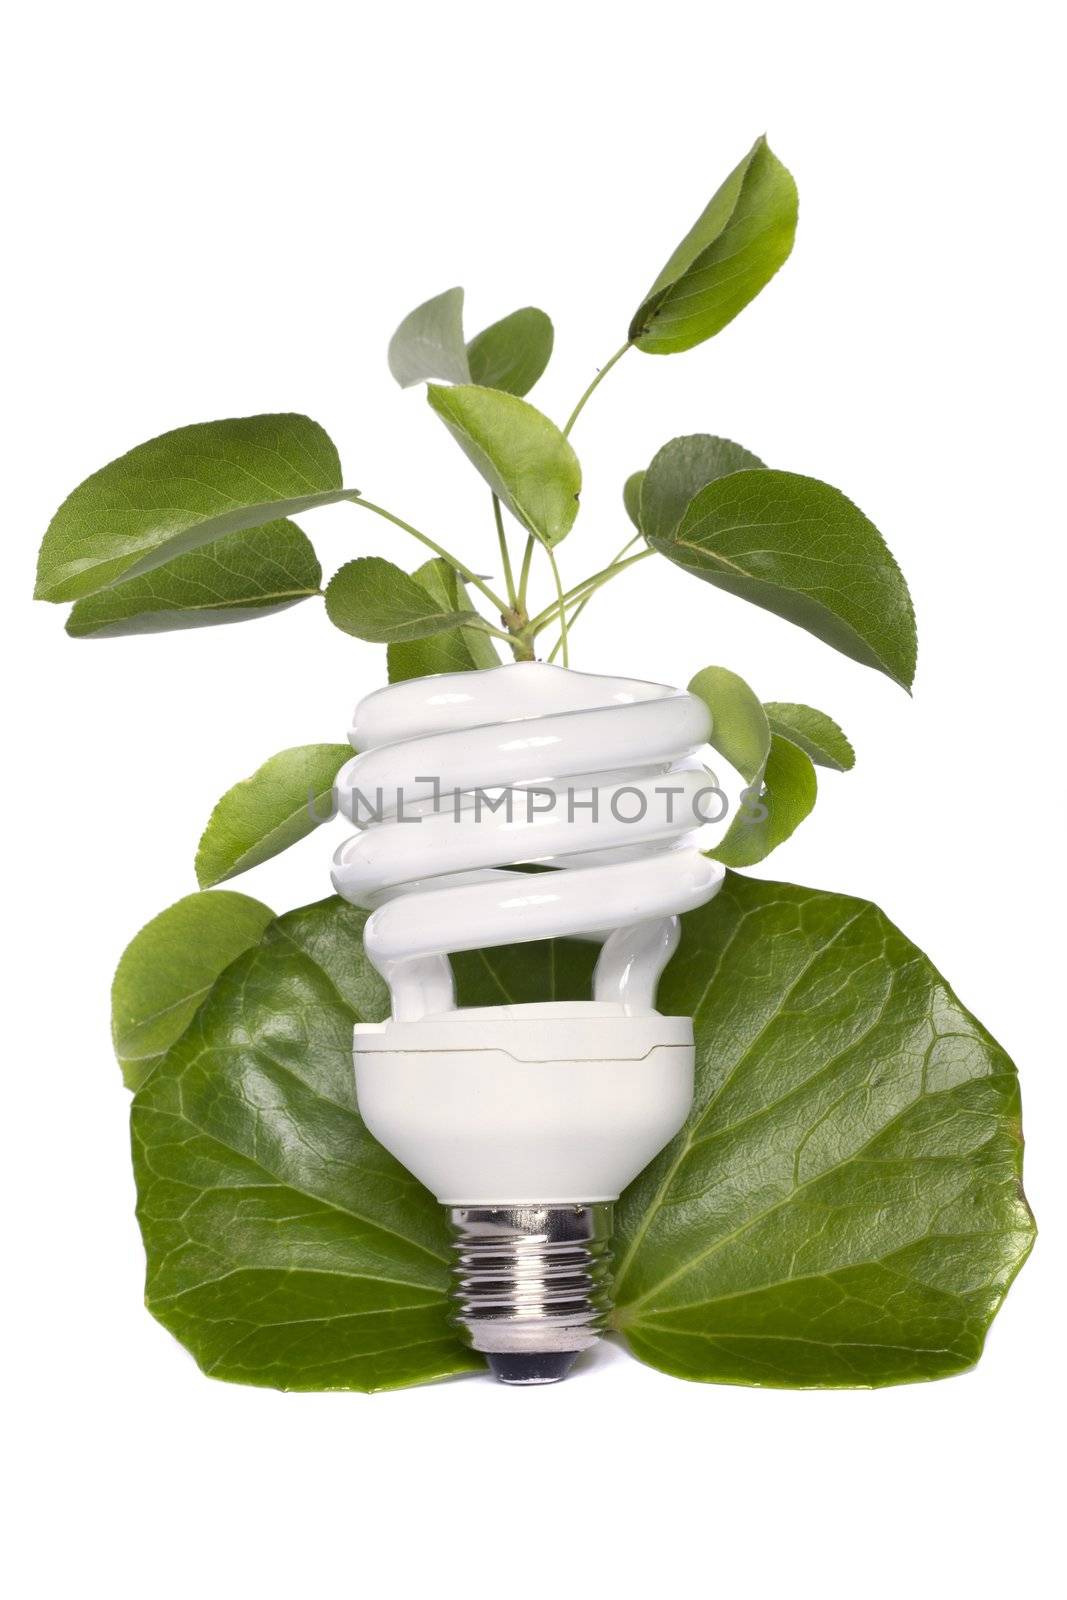 View of a energy efficiency light bulb isolated on a background with vegetation. 